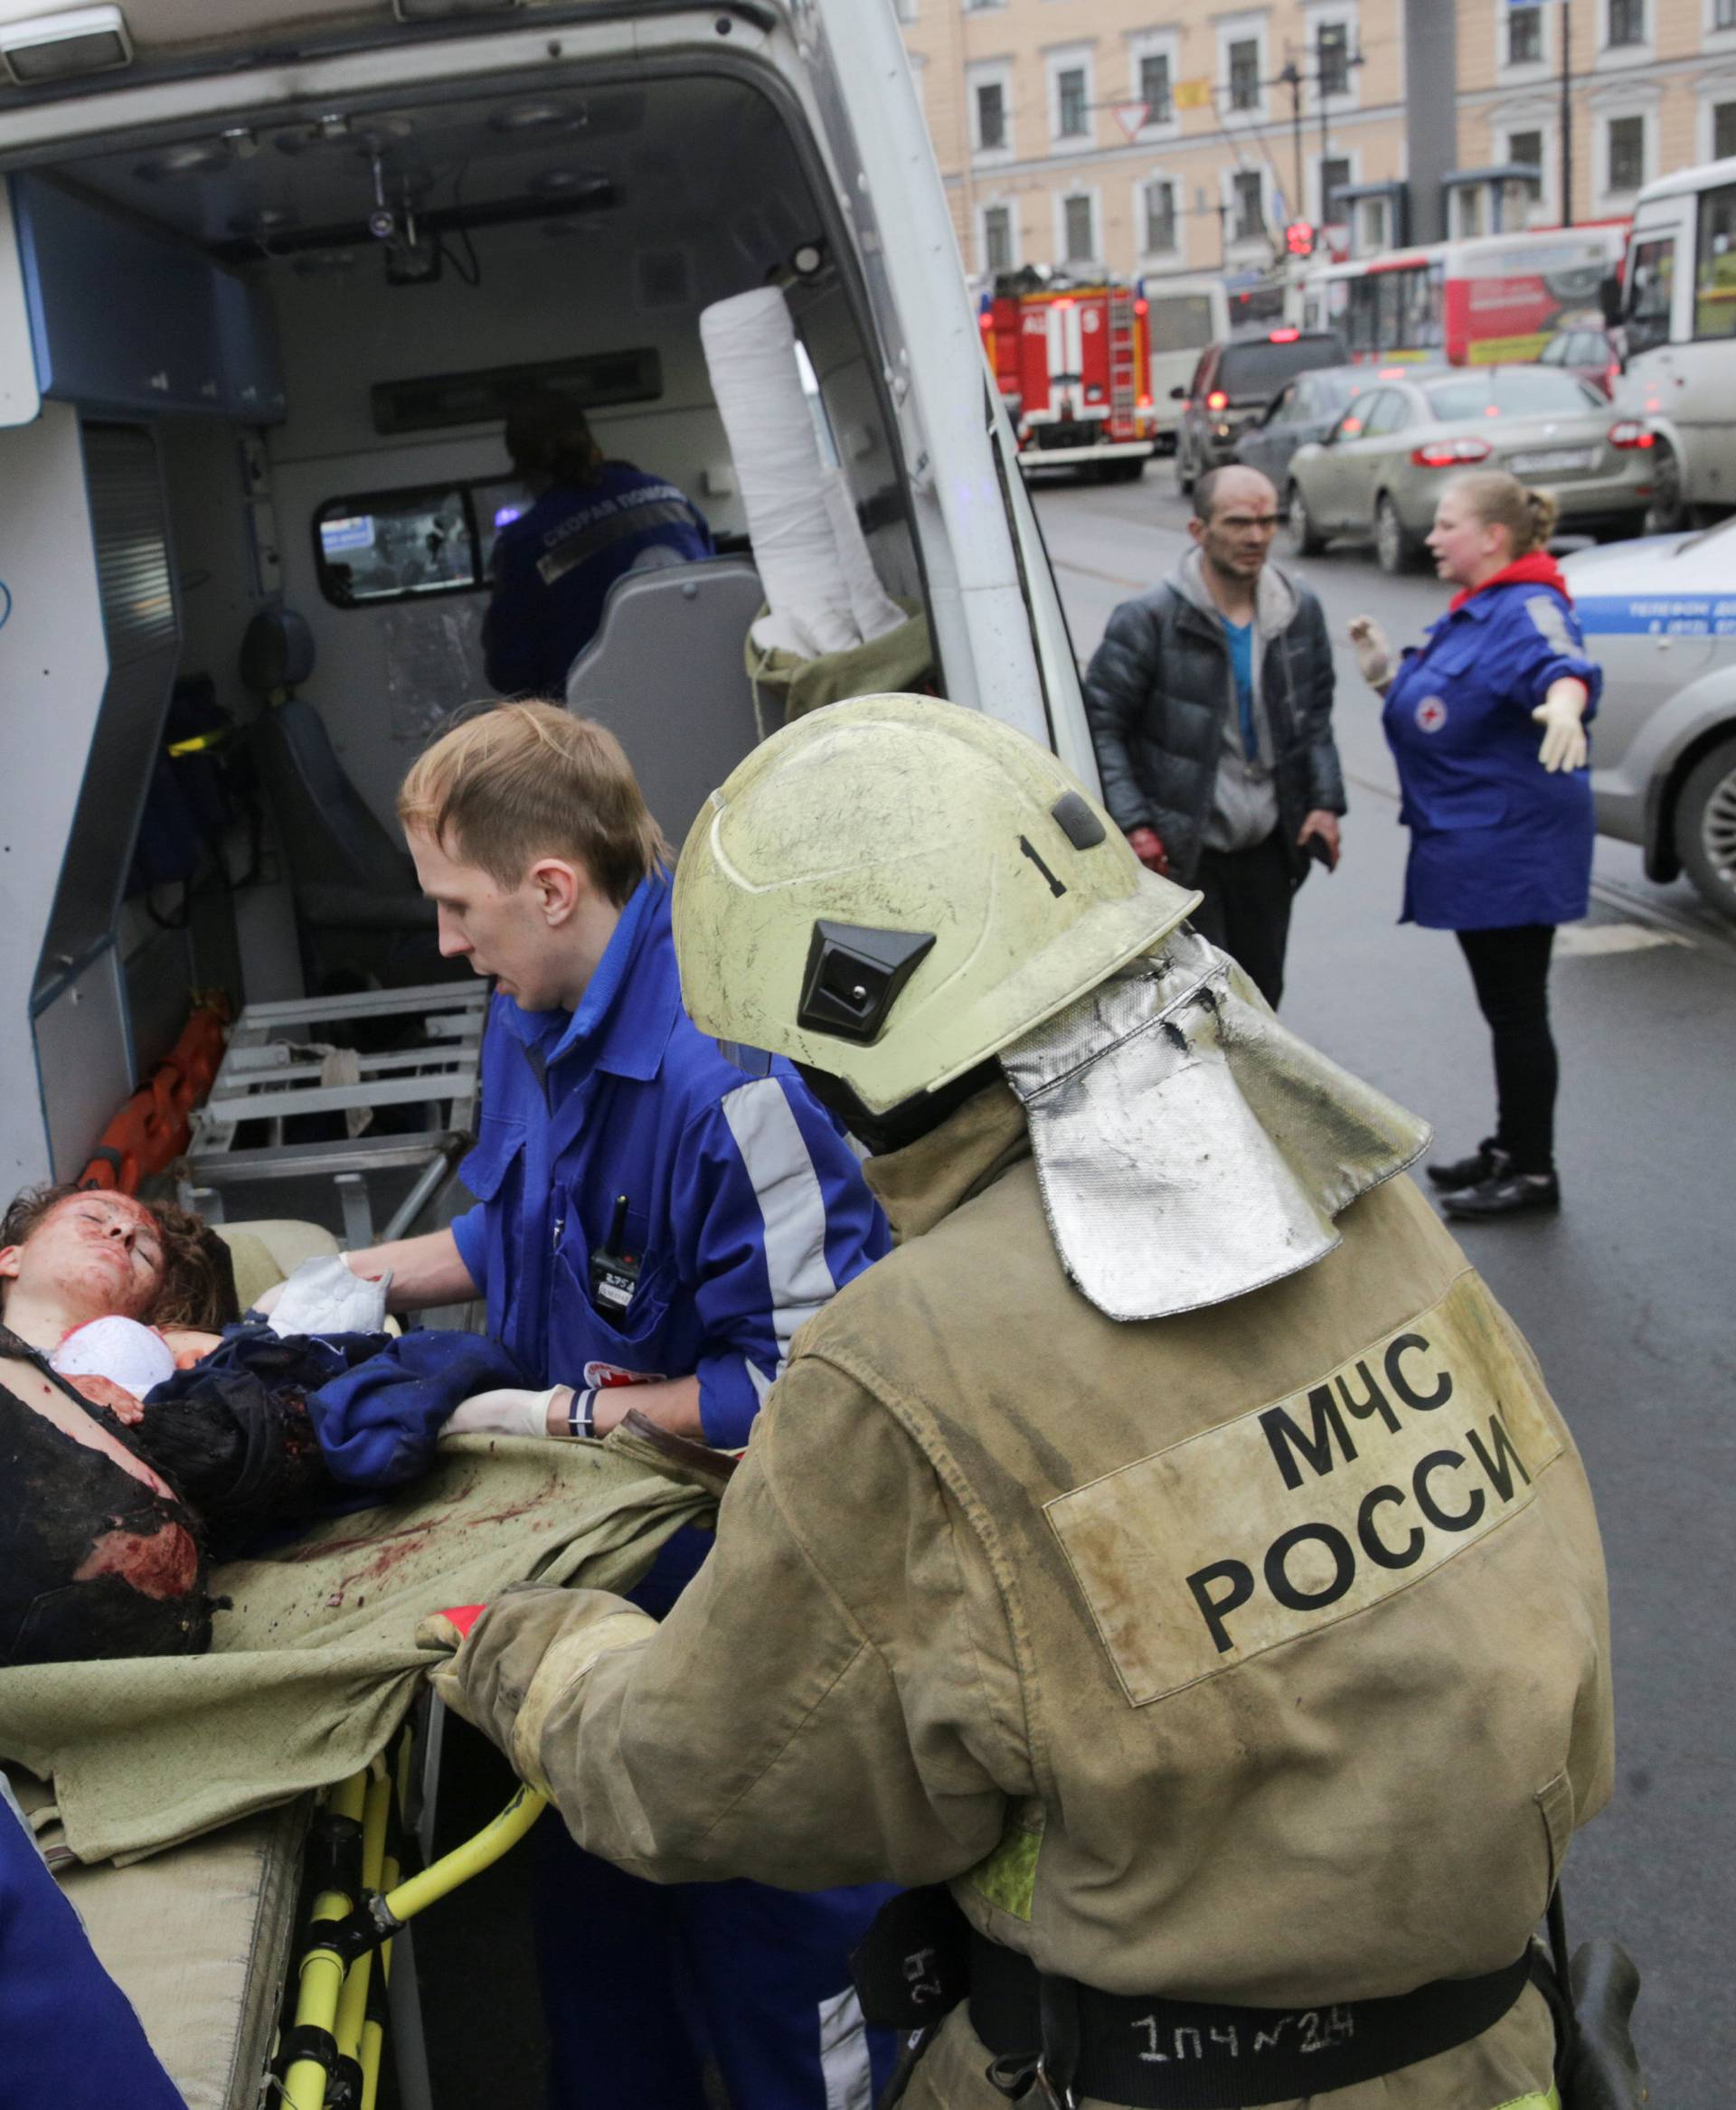 An injured person is helped by emergency services outside Sennaya Ploshchad metro station following explosions in St. Petersburg